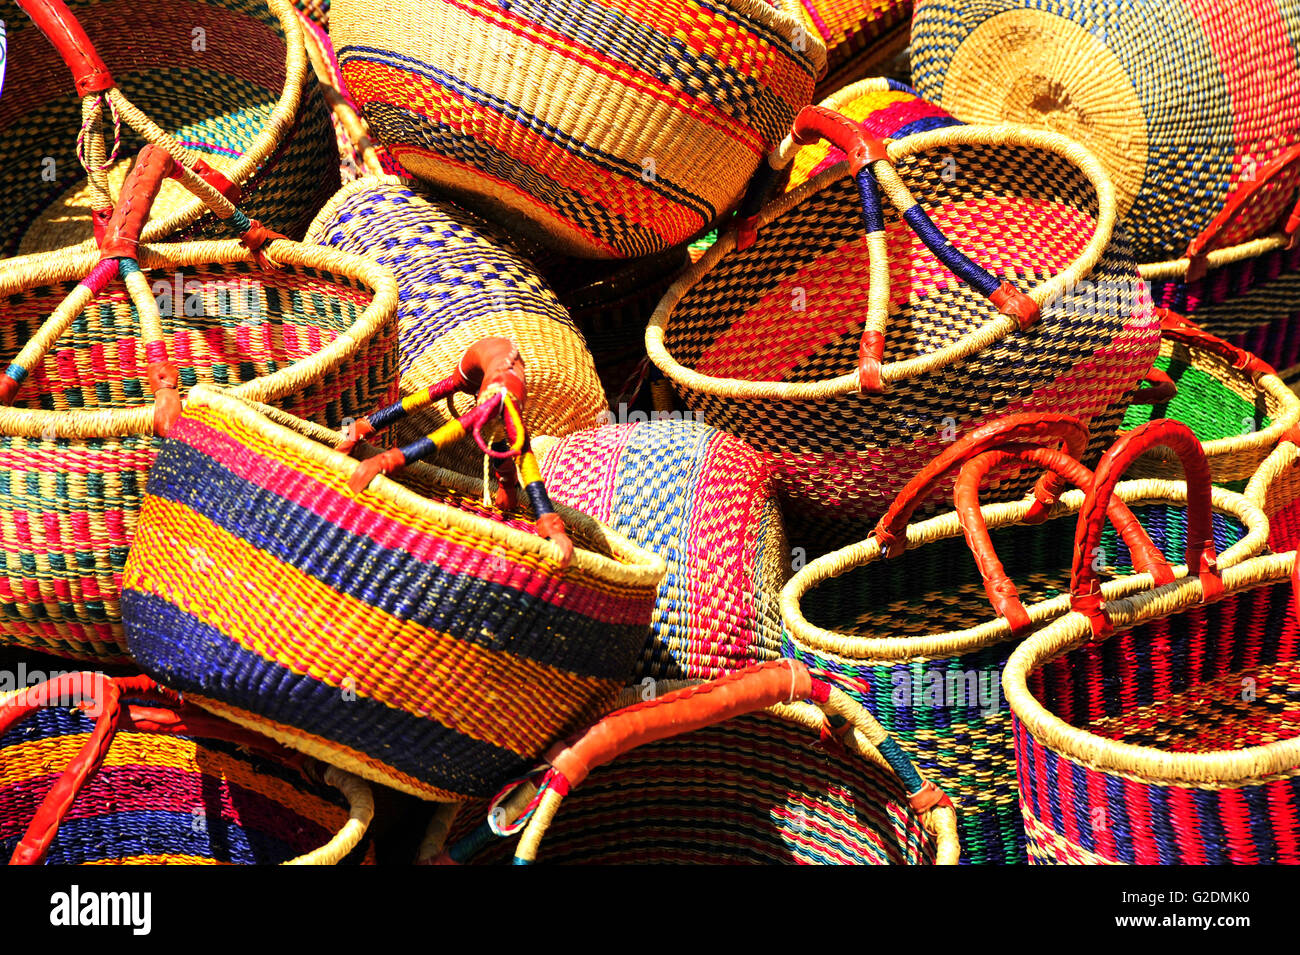 Mexican Baskets High Resolution Stock Photography and Images - Alamy